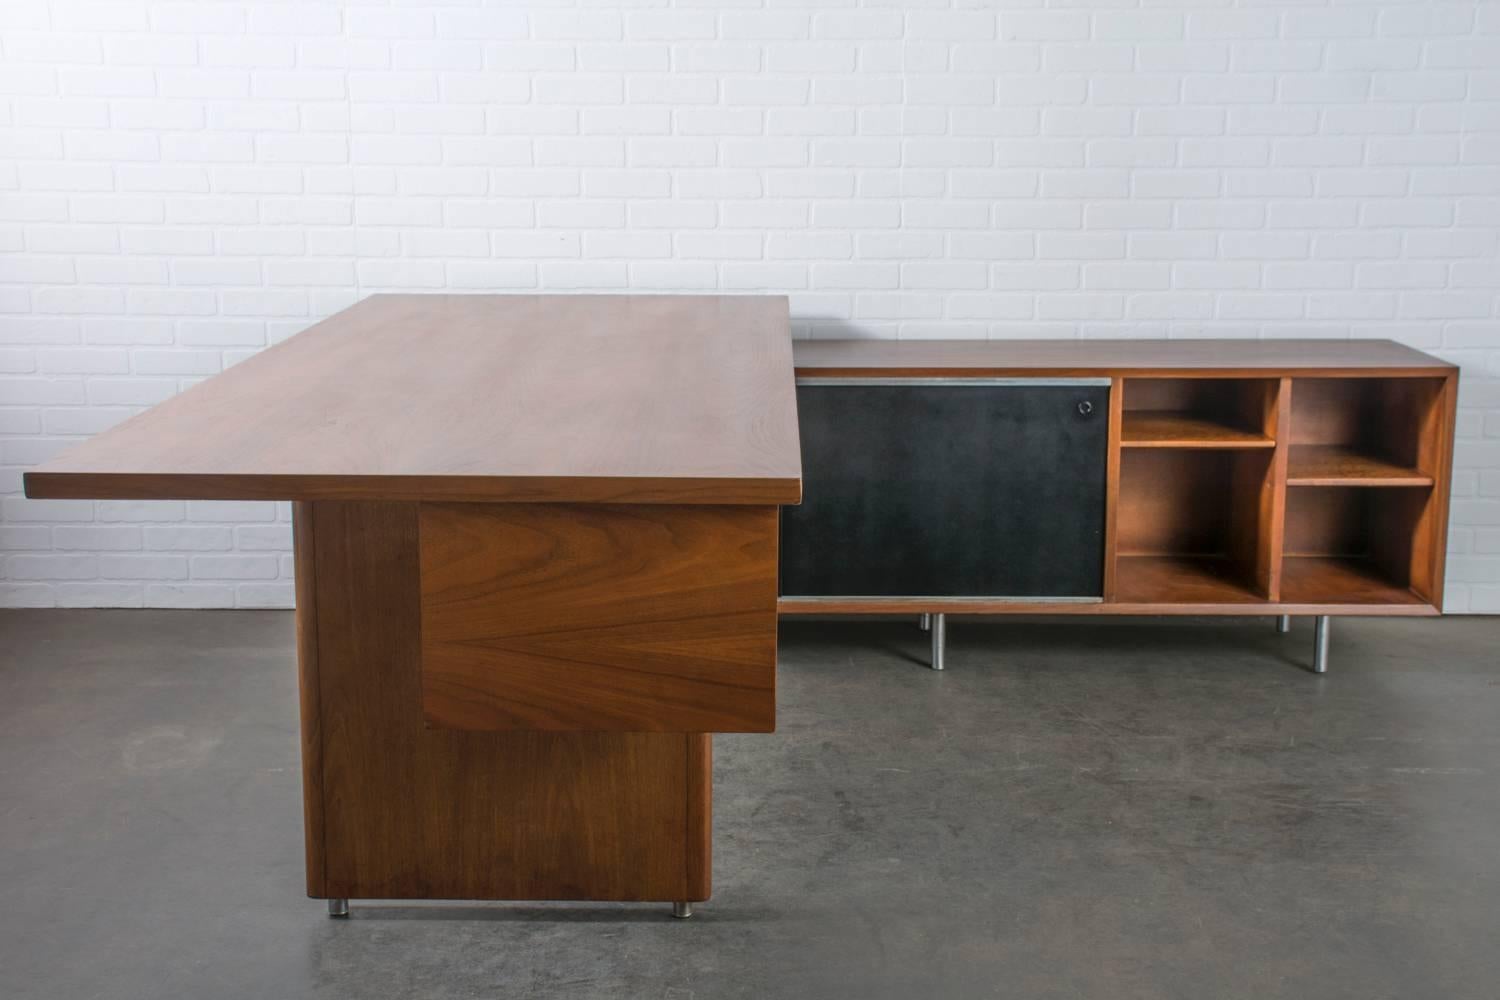 This Mid-Century Modern walnut executive desk was designed by George Nelson for Herman Miller in the 1950s. It features a large walnut desk top with three drawers and a credenza return with black sliding doors (on front and back), four drawers